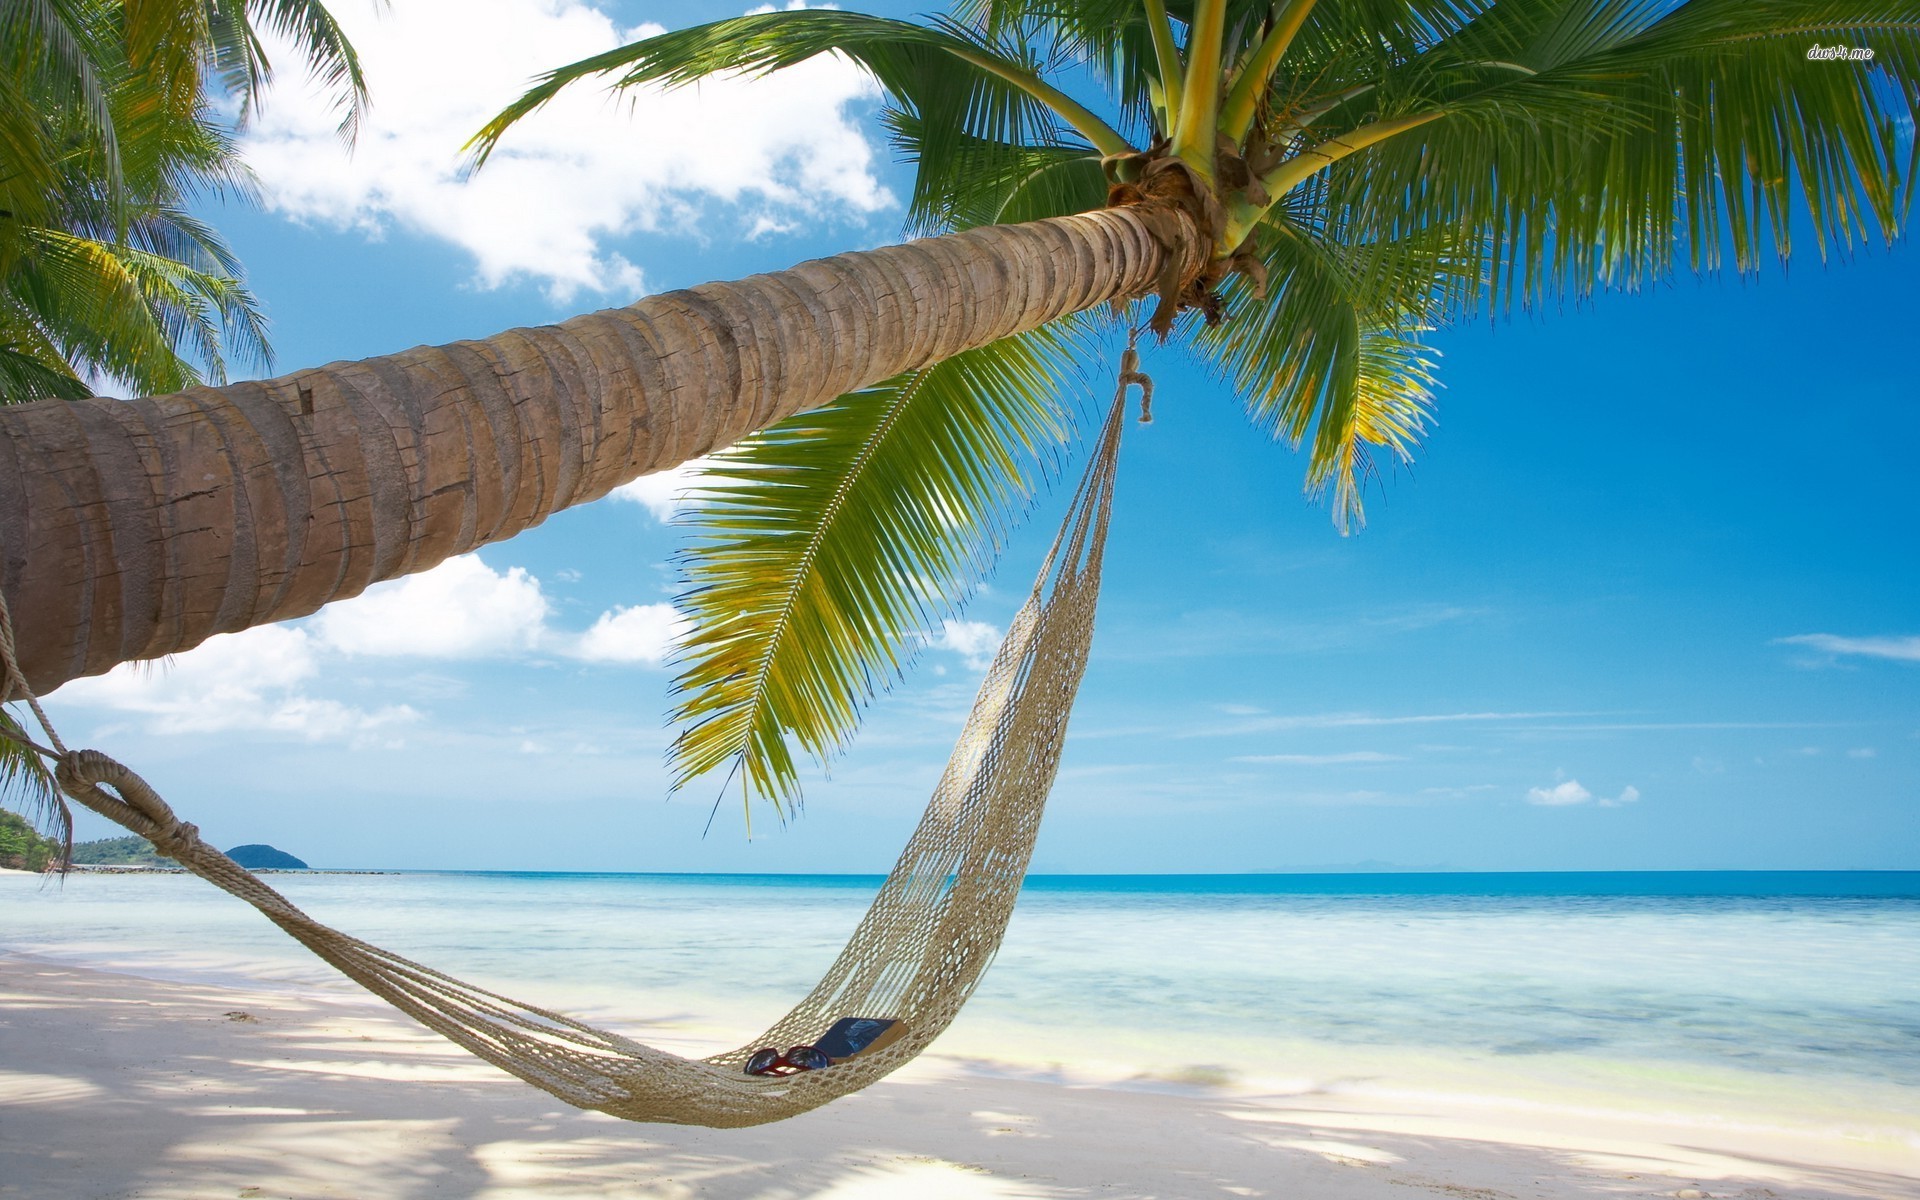 Collection of Beach Hammock Wallpaper on HDWallpapers